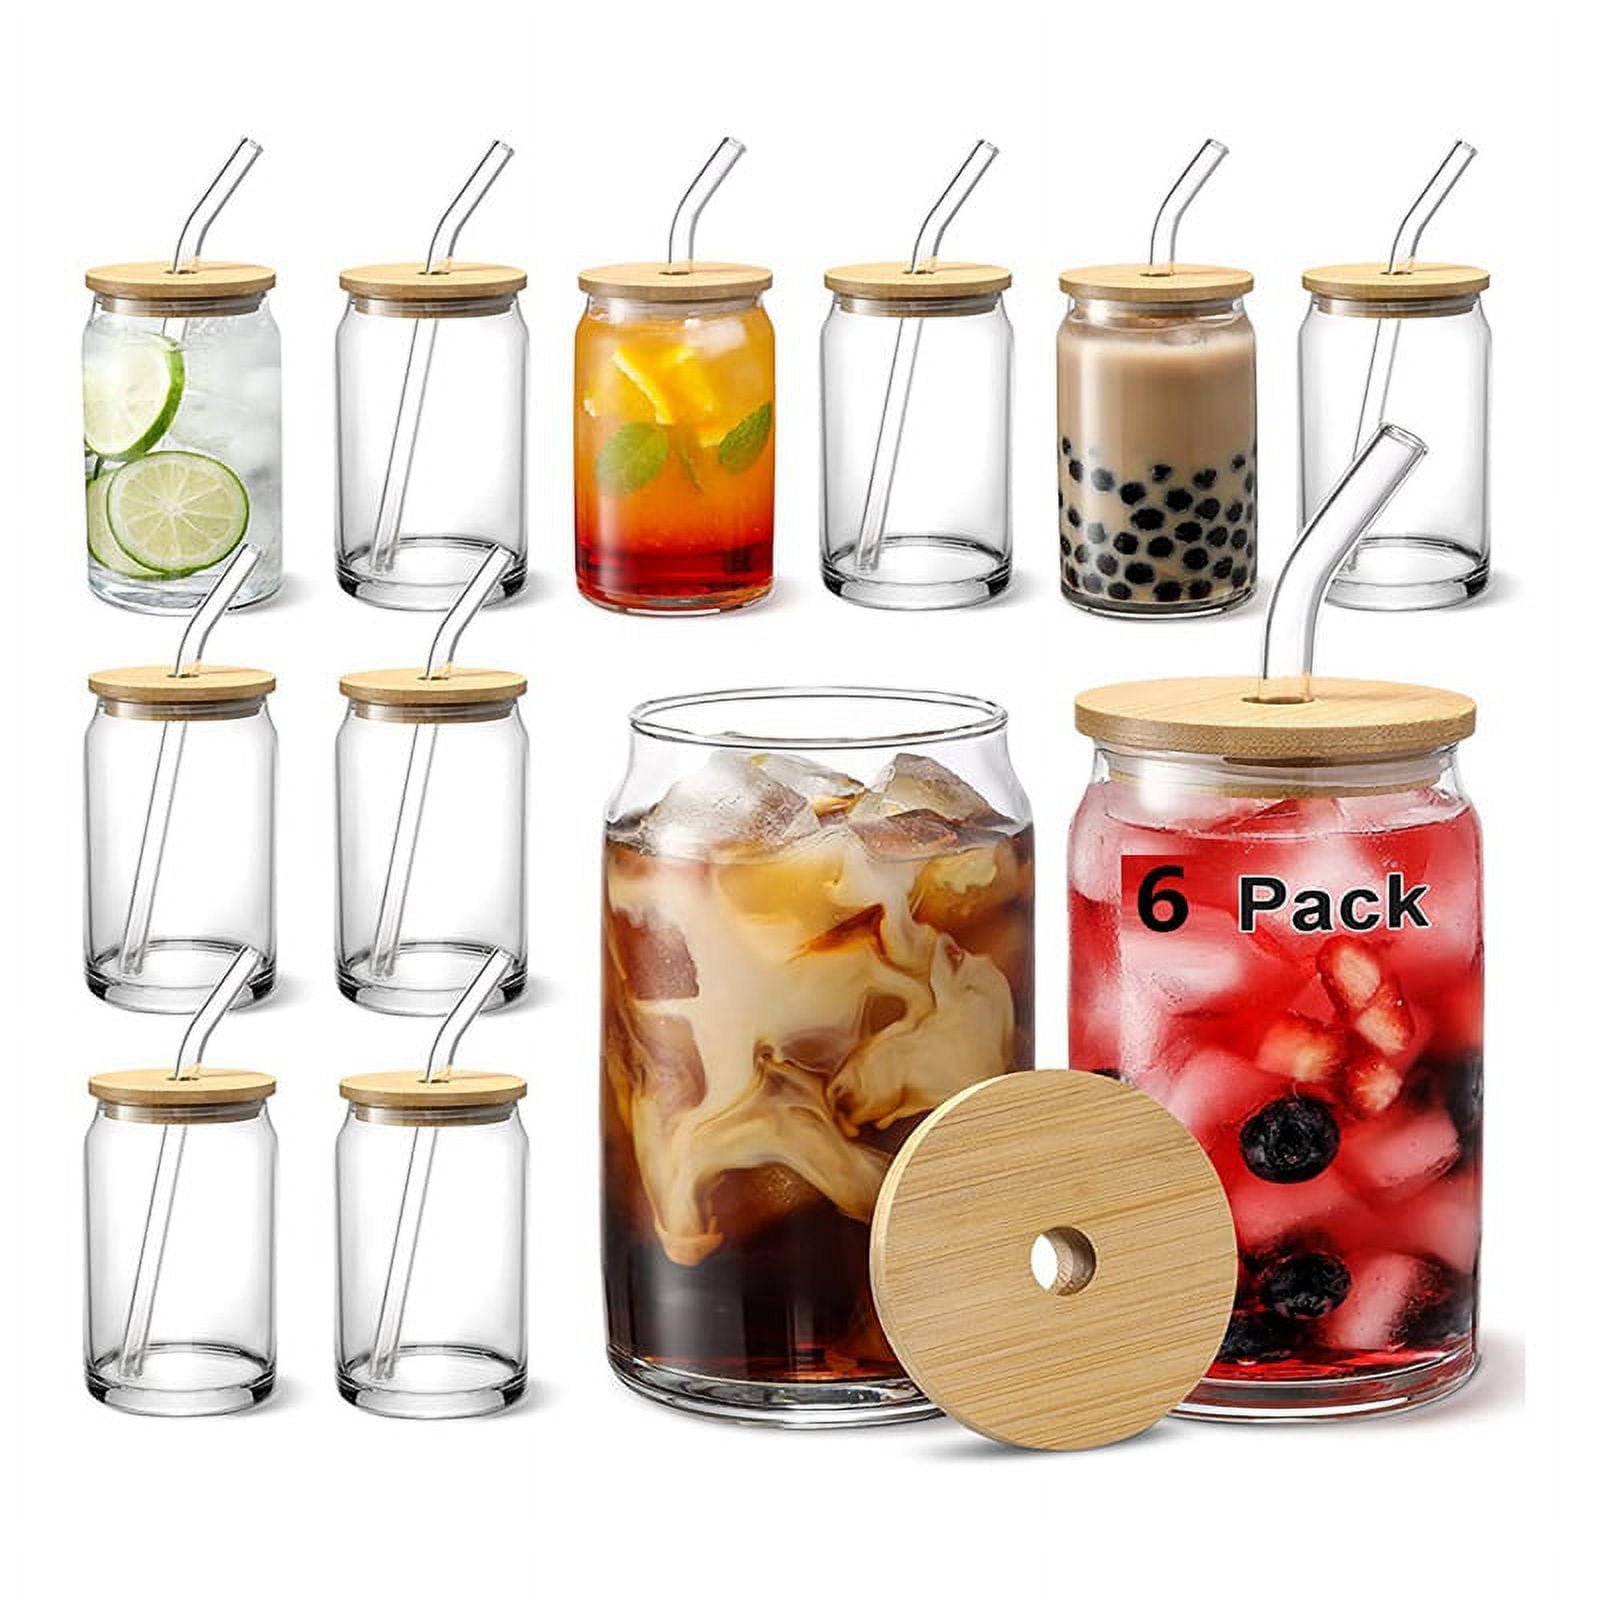  ASKIZ [16Pcs Set] Glass Cups With Bamboo Lids And Straws,16Oz  Glass Water Bottles Glass Jars Cups Drinking Glasses, Beer Glasses Ice  Coffee Glasses For Juicing Coffee Soda Tea: Home & Kitchen